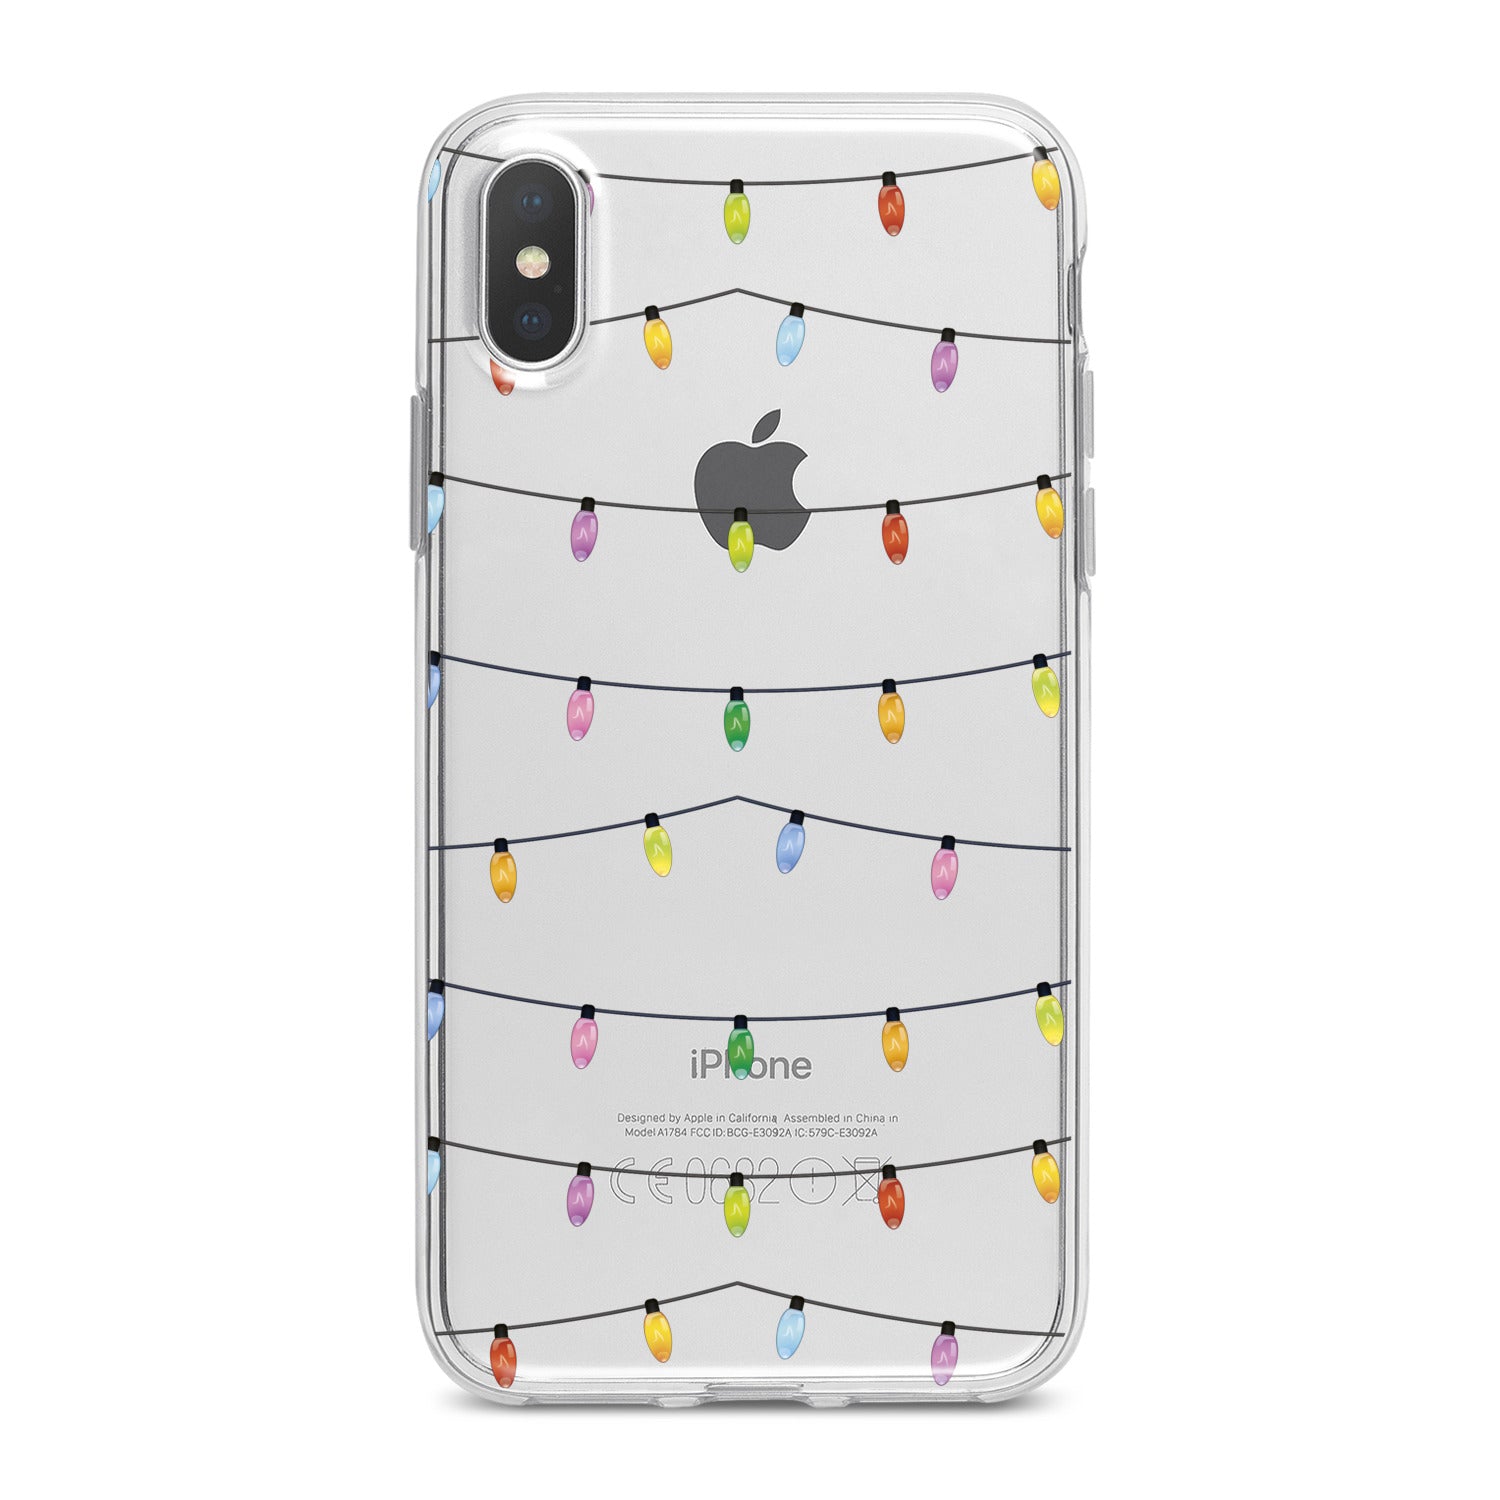 Lex Altern Colored Garlands Phone Case for your iPhone & Android phone.